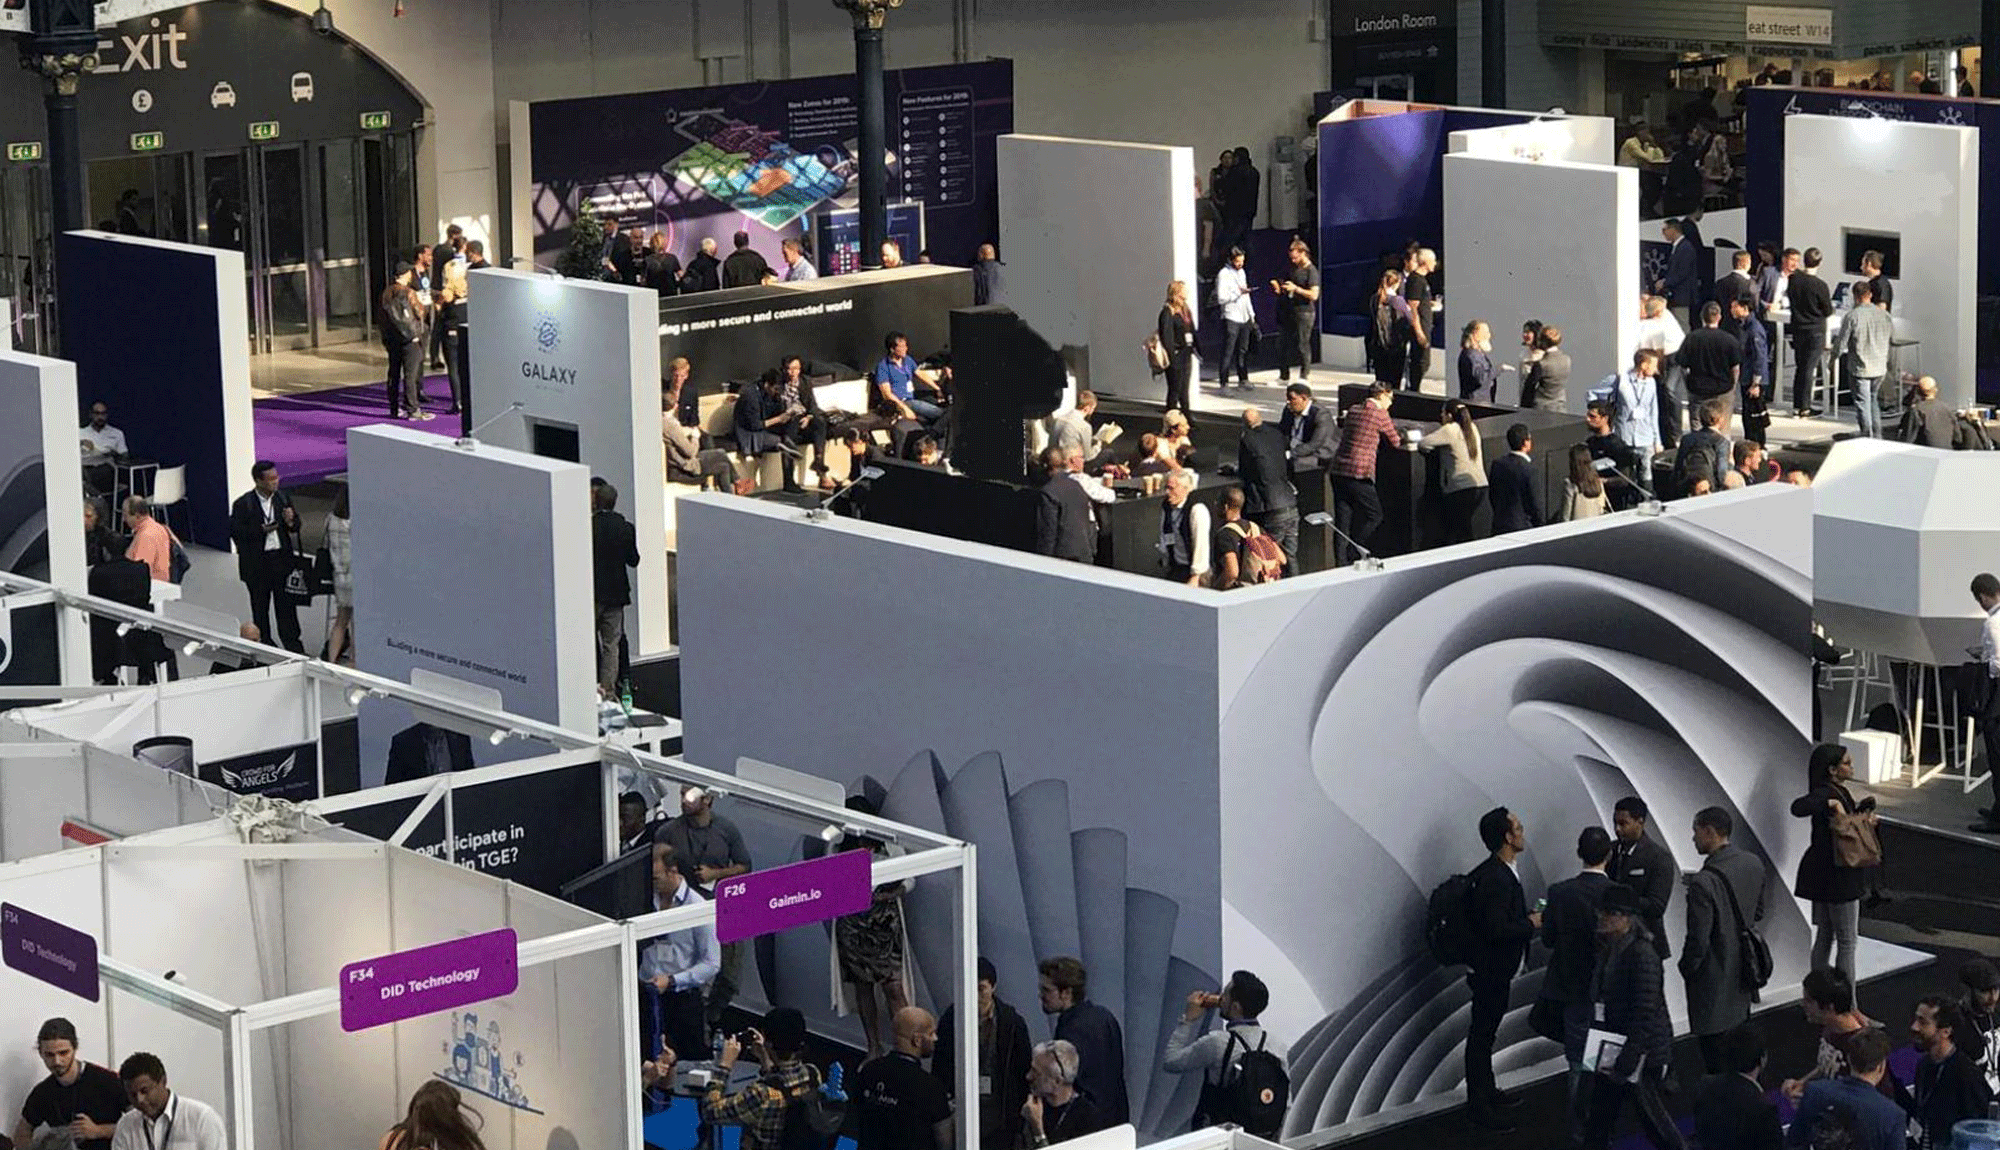 Tech Village install at Olympia